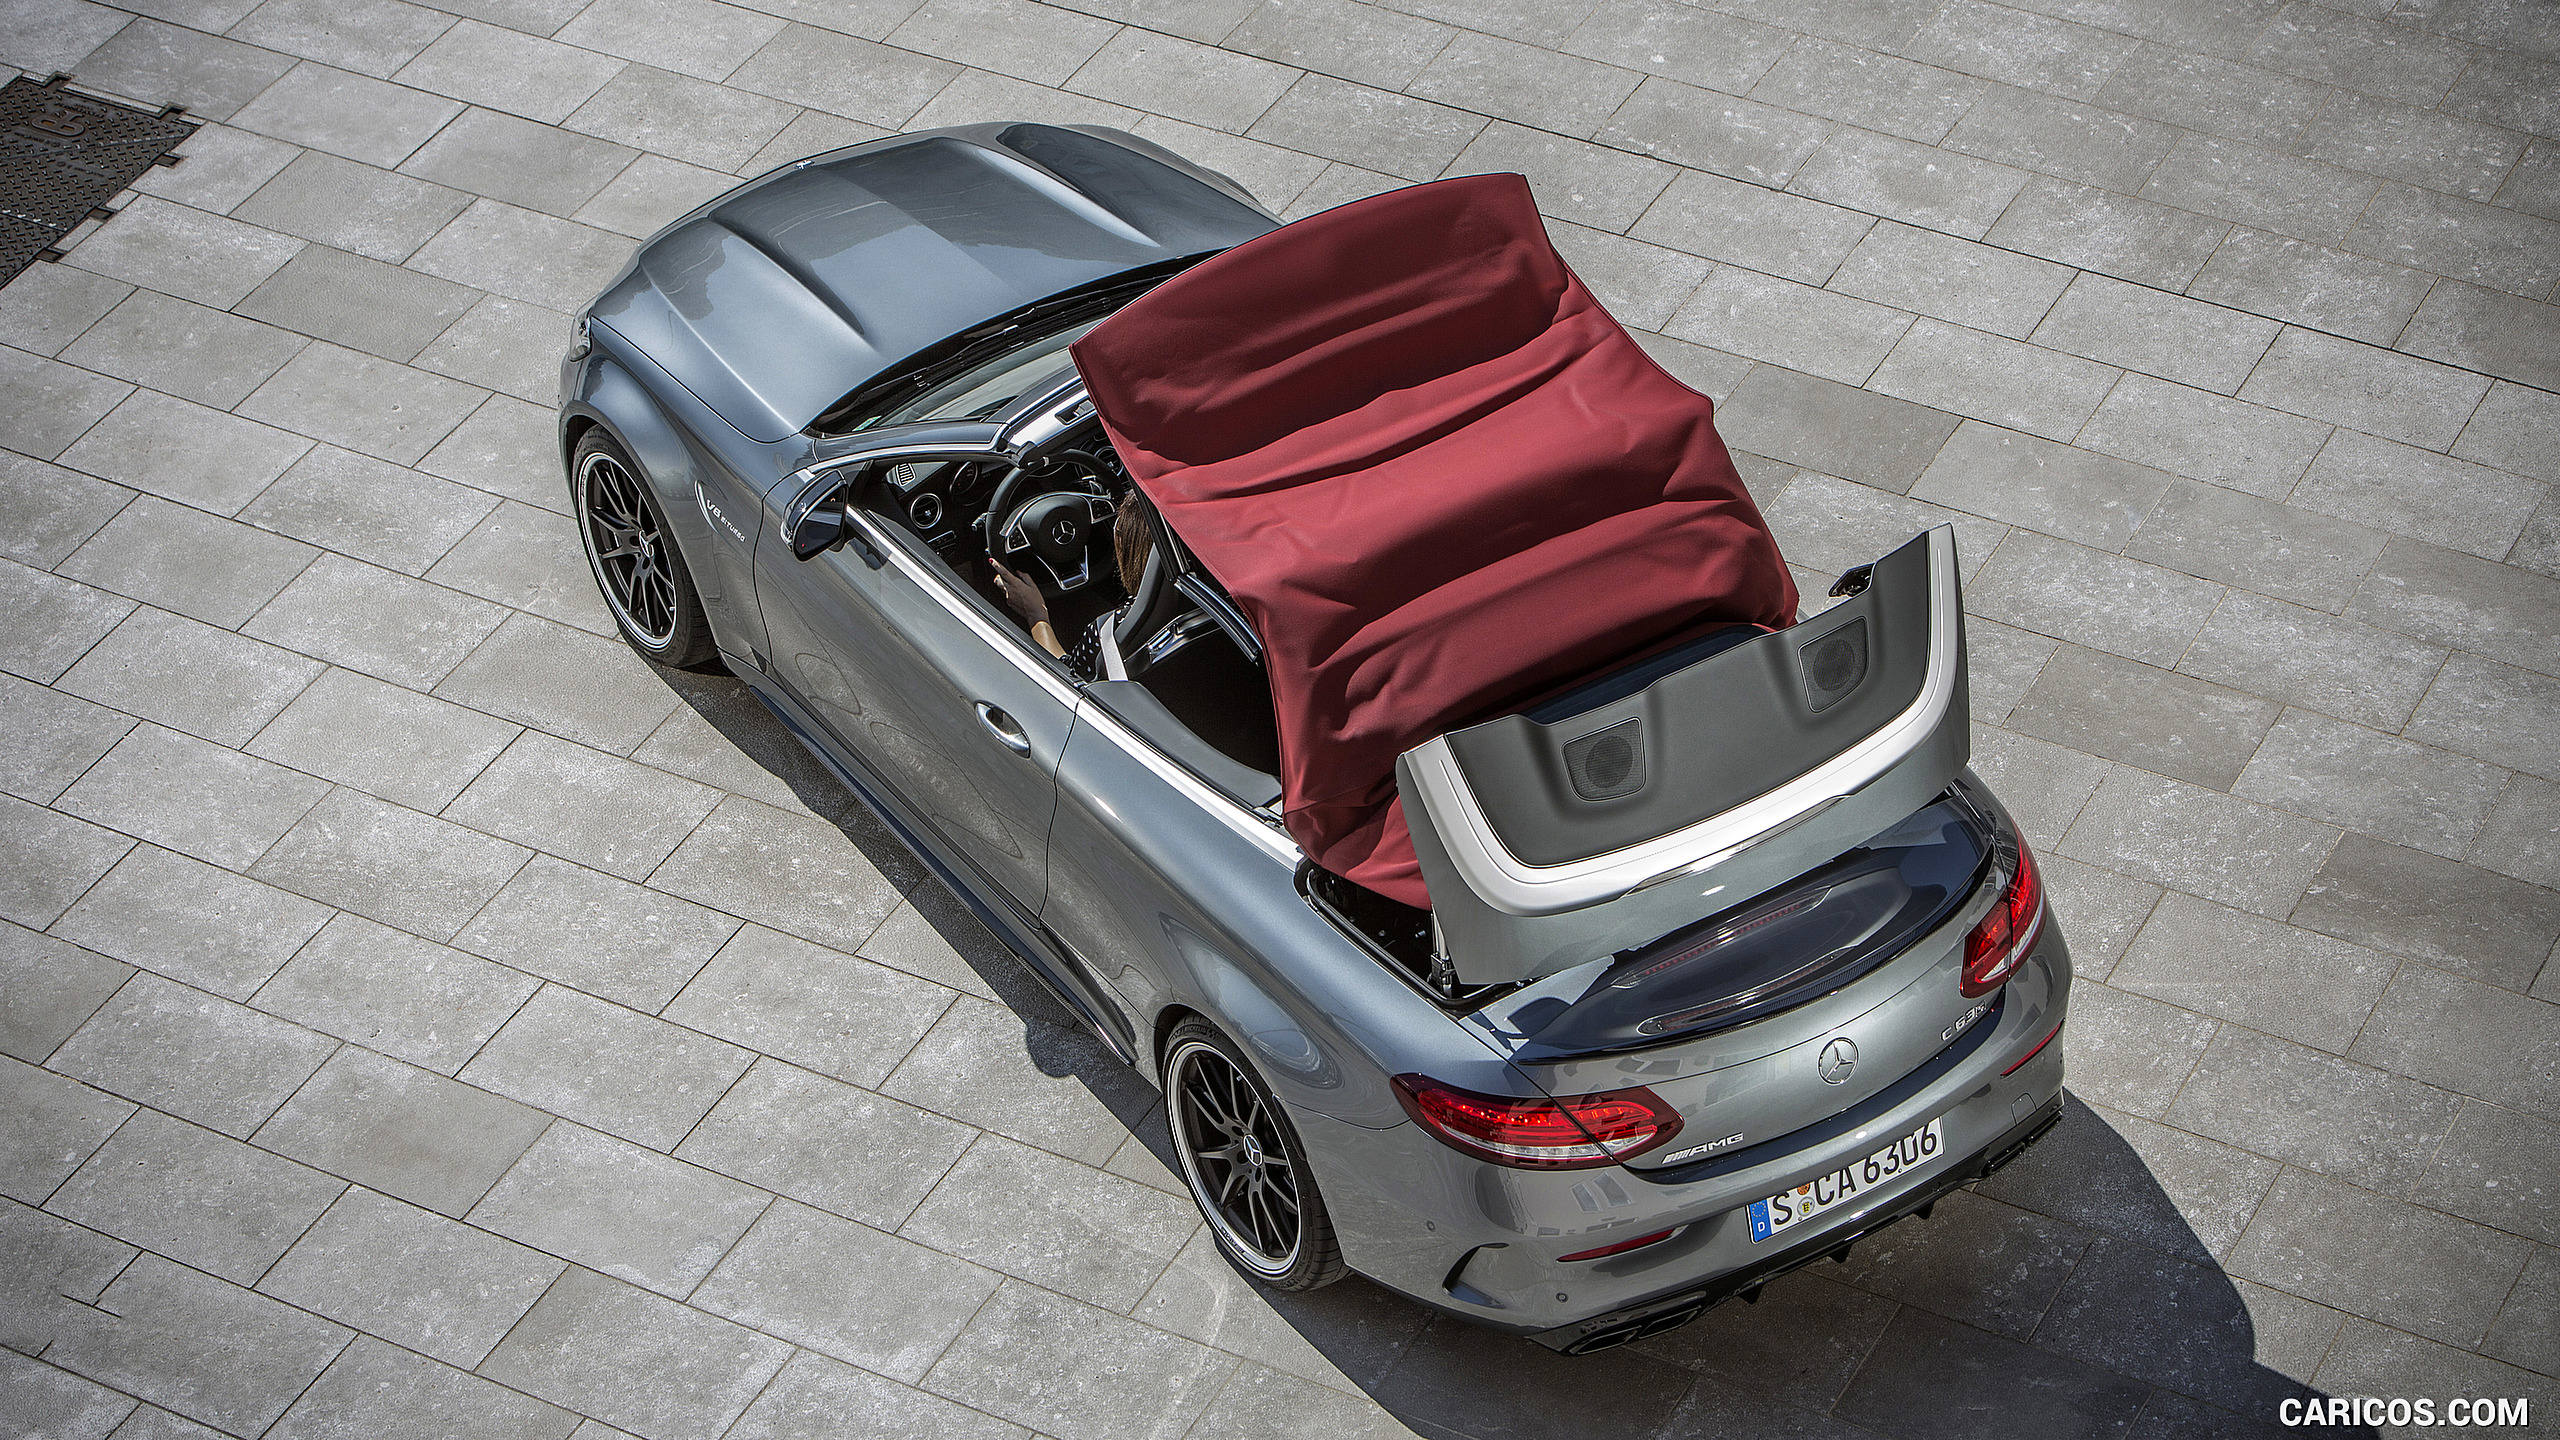 2017 Mercedes-AMG C63 S Cabriolet - Top, #64 of 222